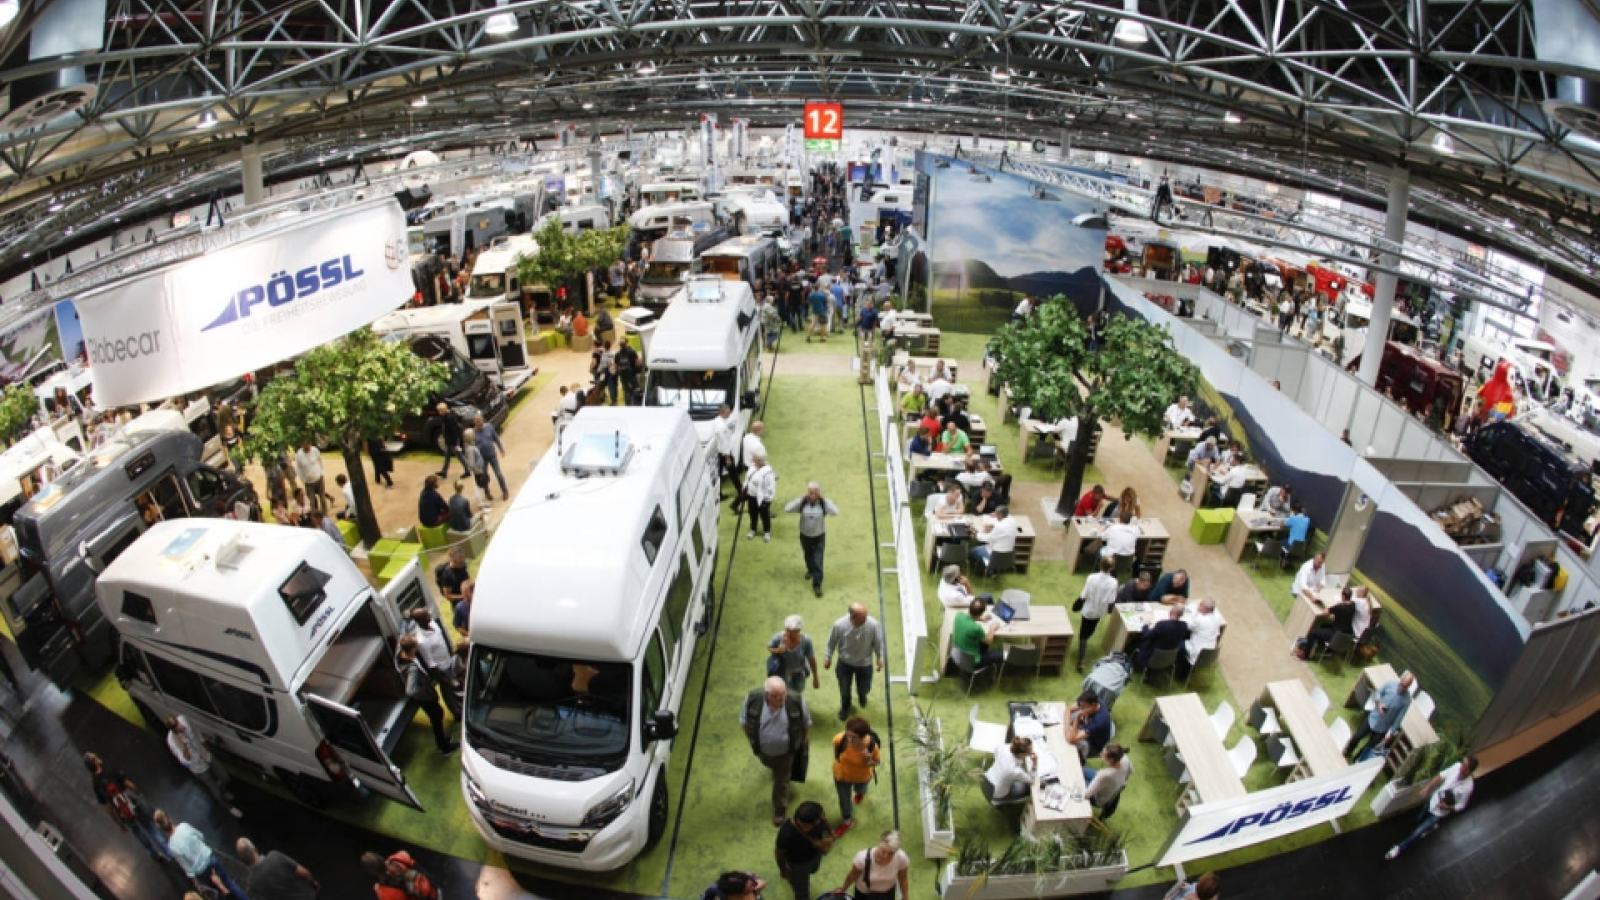 The 'caravaning' sector arrives in Spain and could grow by 30% in the coming years